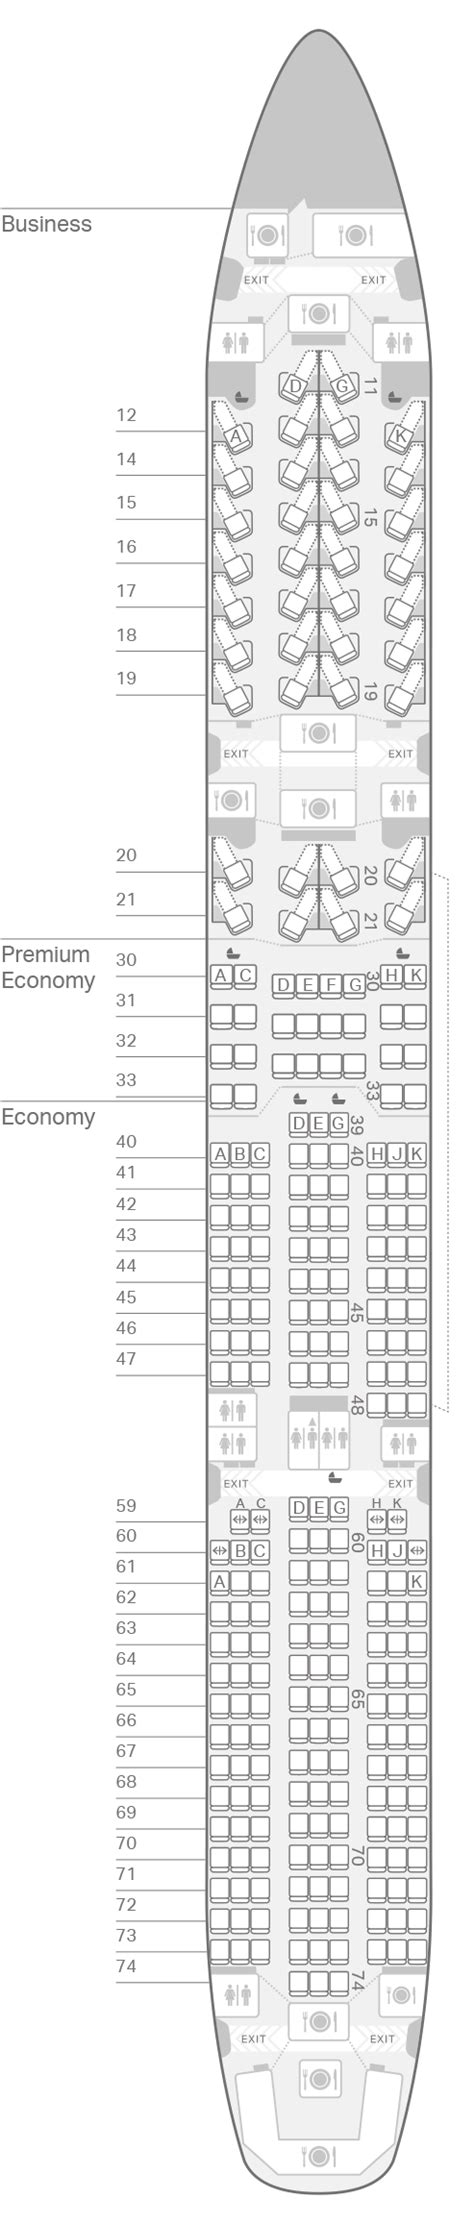 Delta Airbus A350 Seat Map Updated Find The Best Seat Seatmaps Lupon